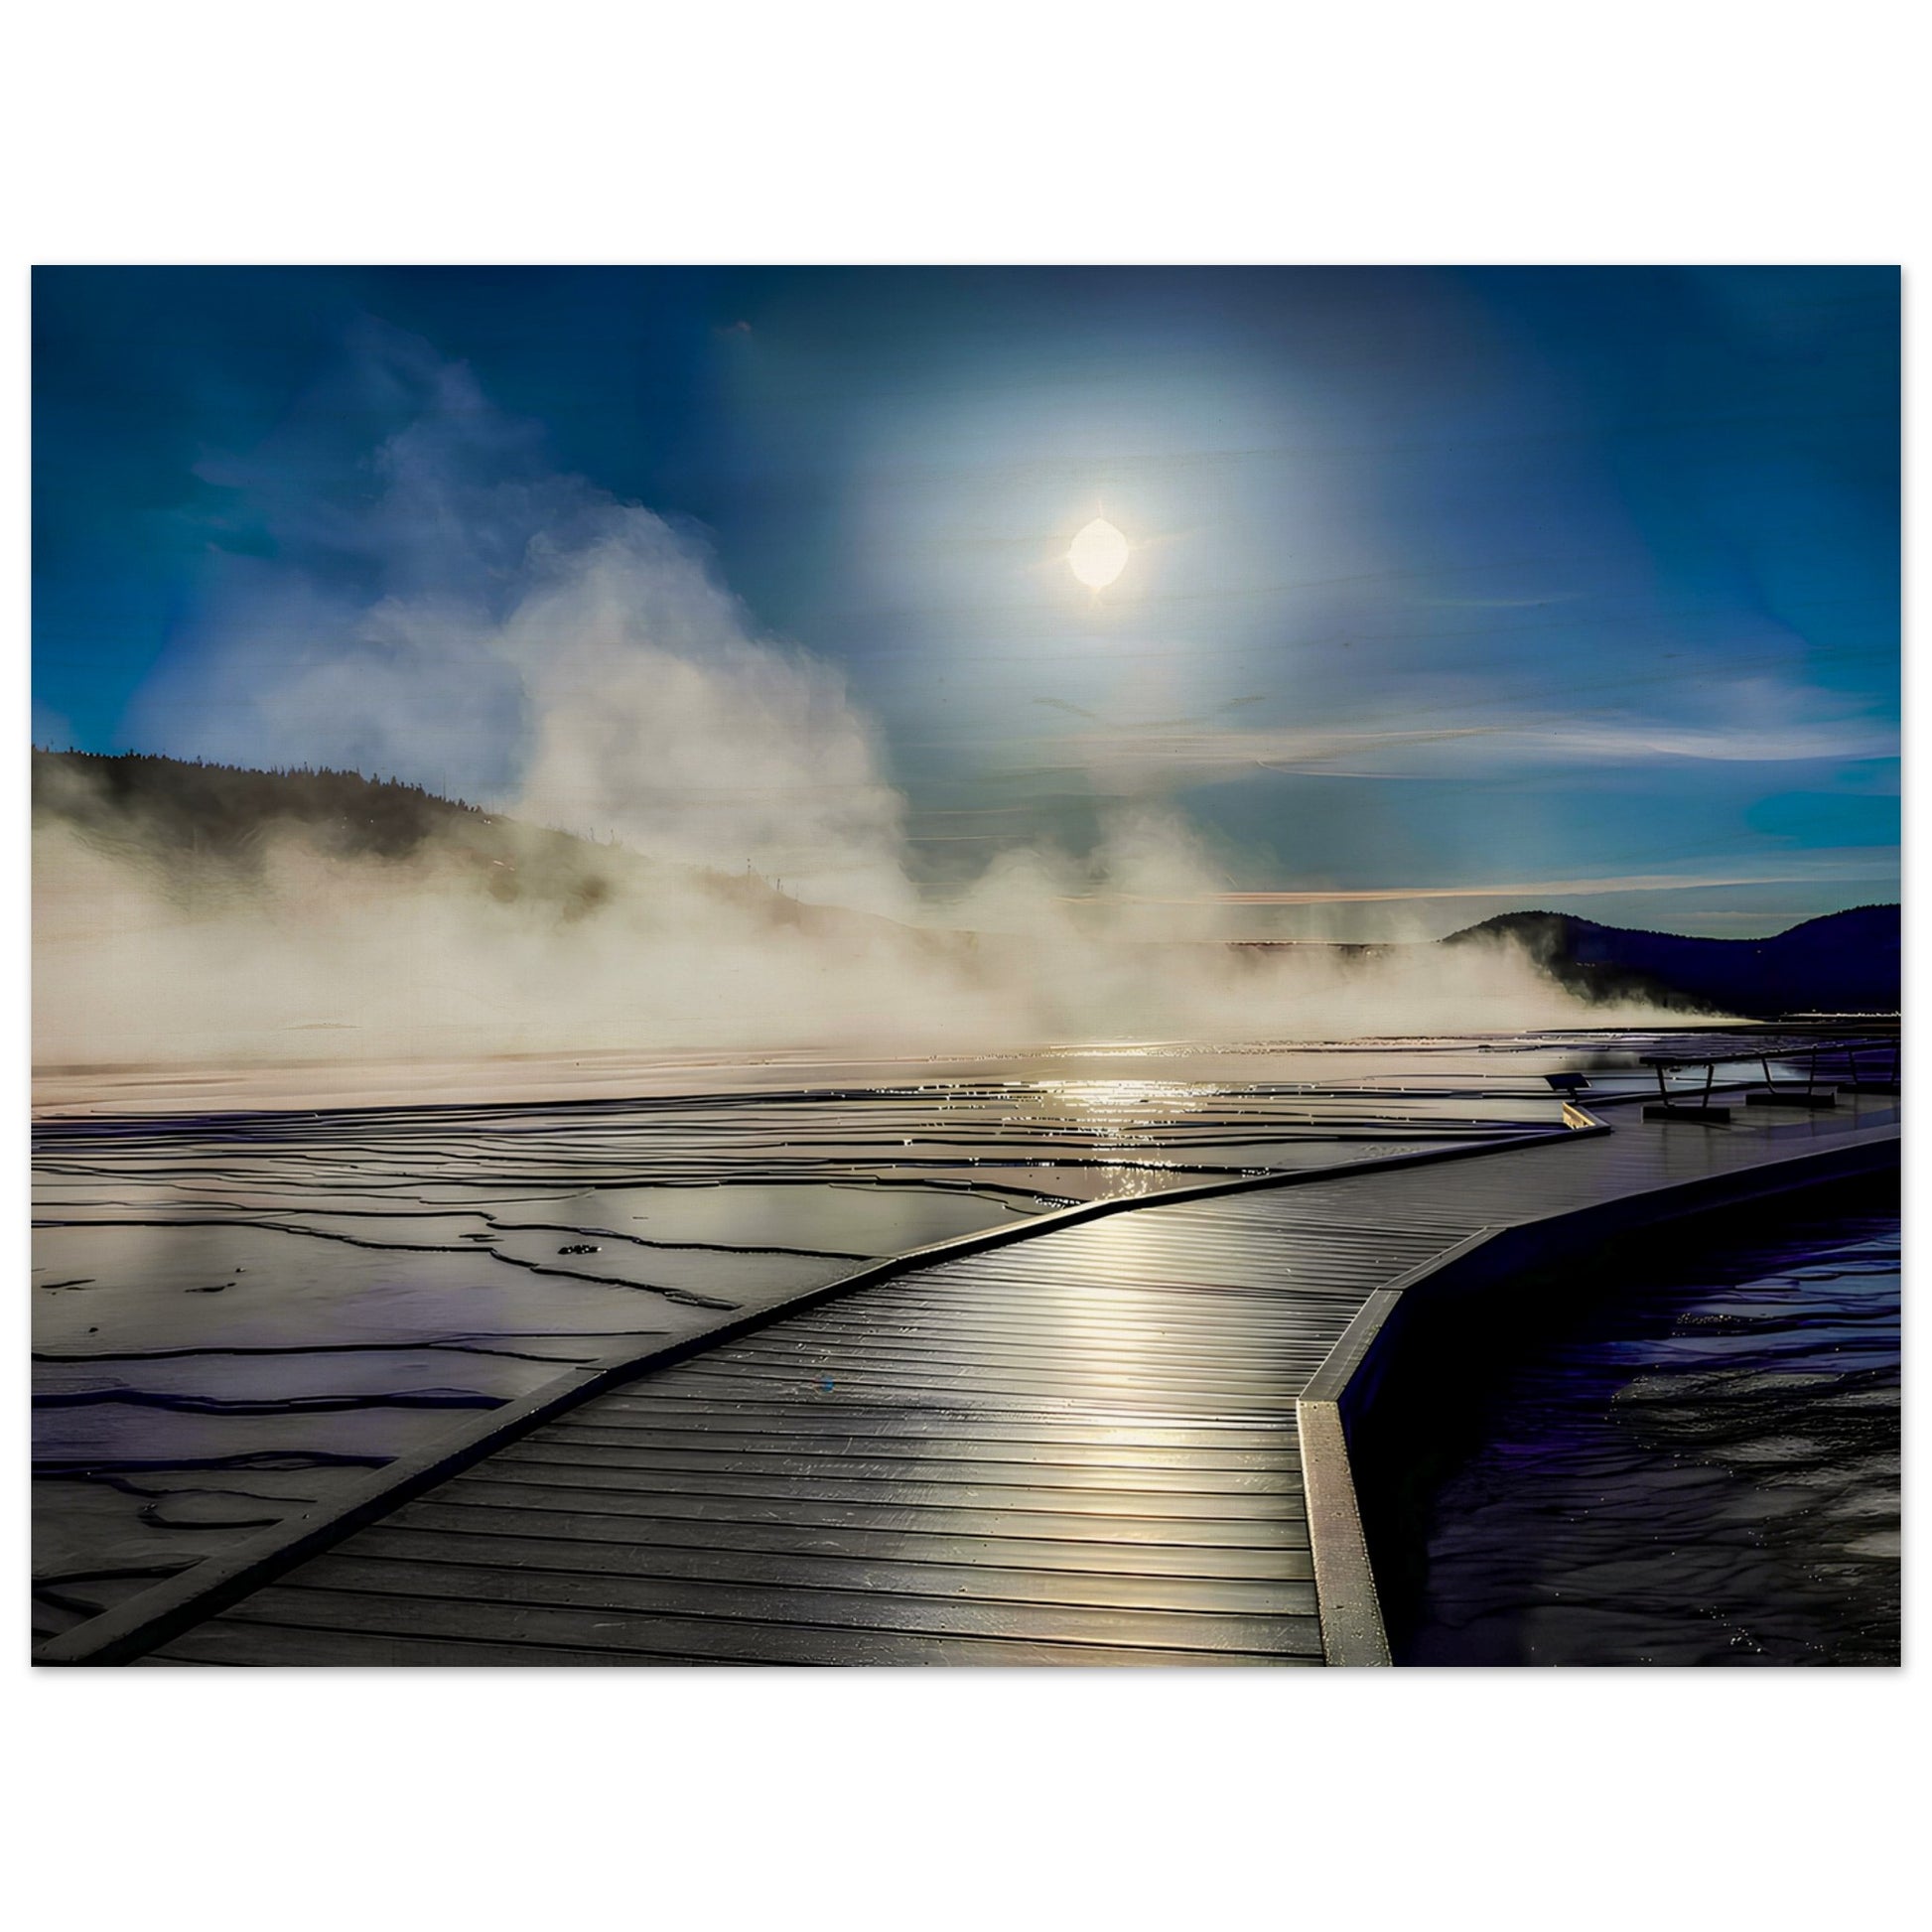 Grand Prismatic Spring, Yellowstone National Park 